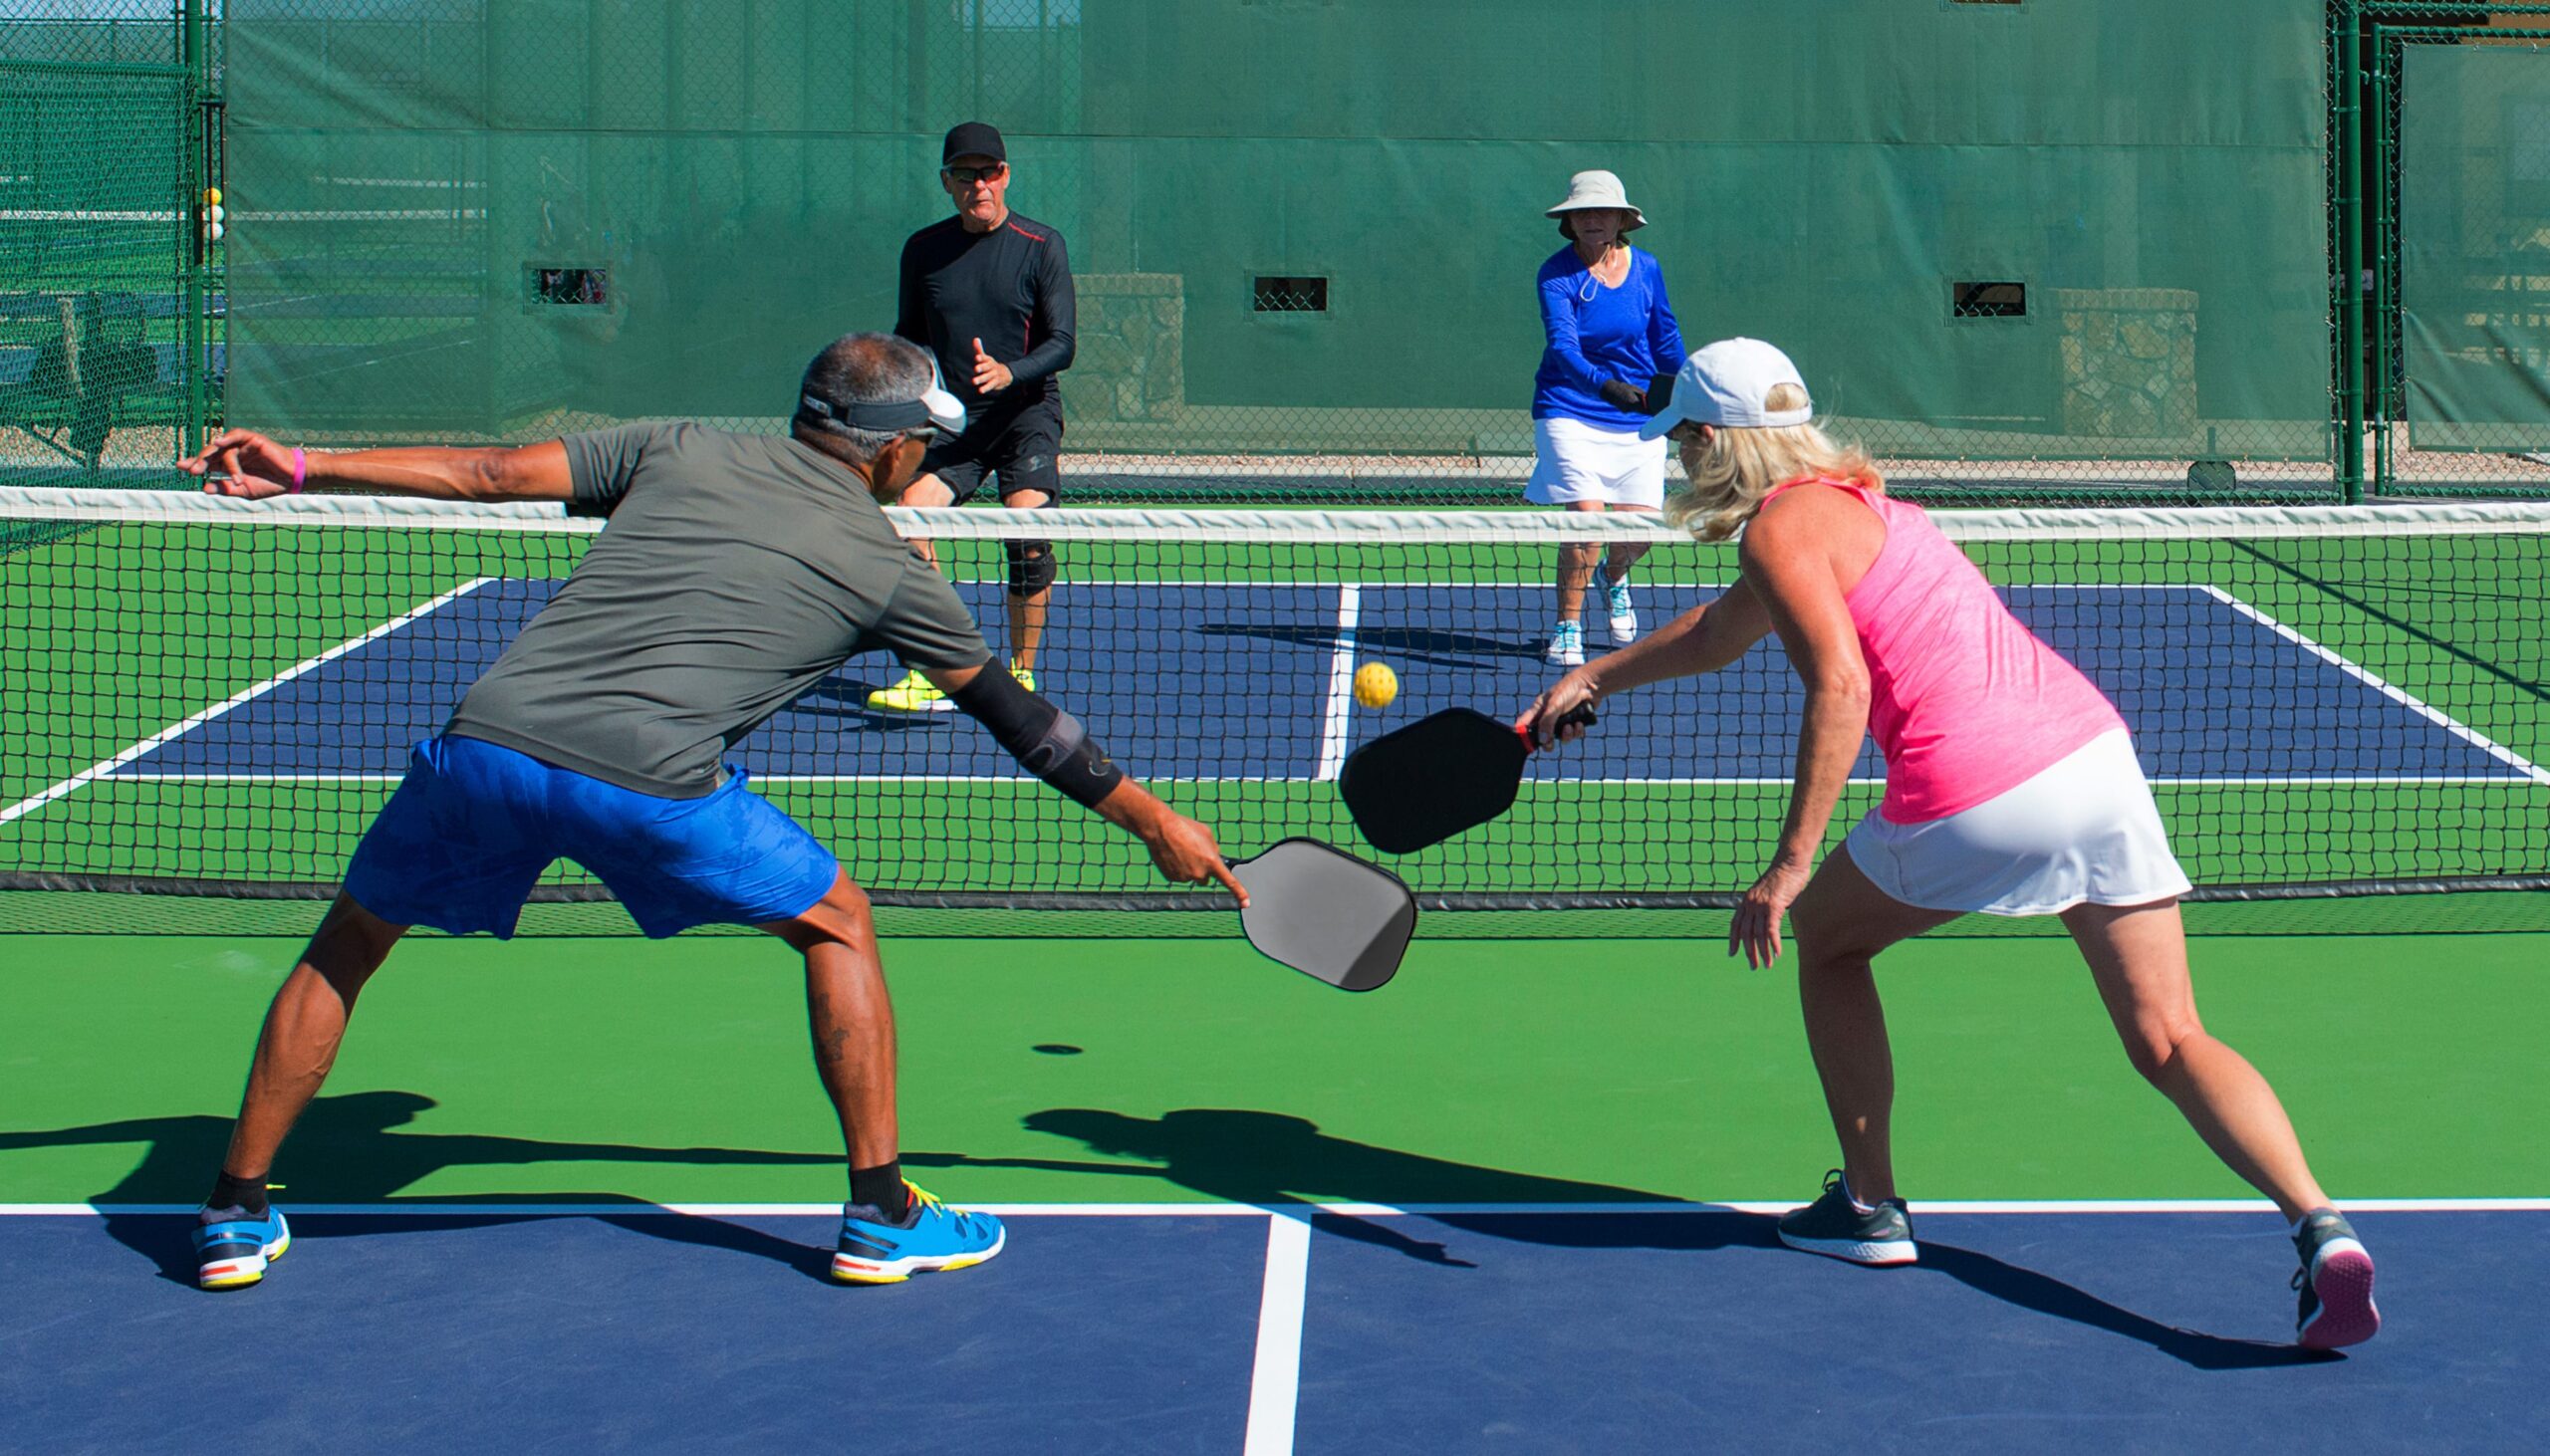 5 Reasons to Join a Pickleball Trip